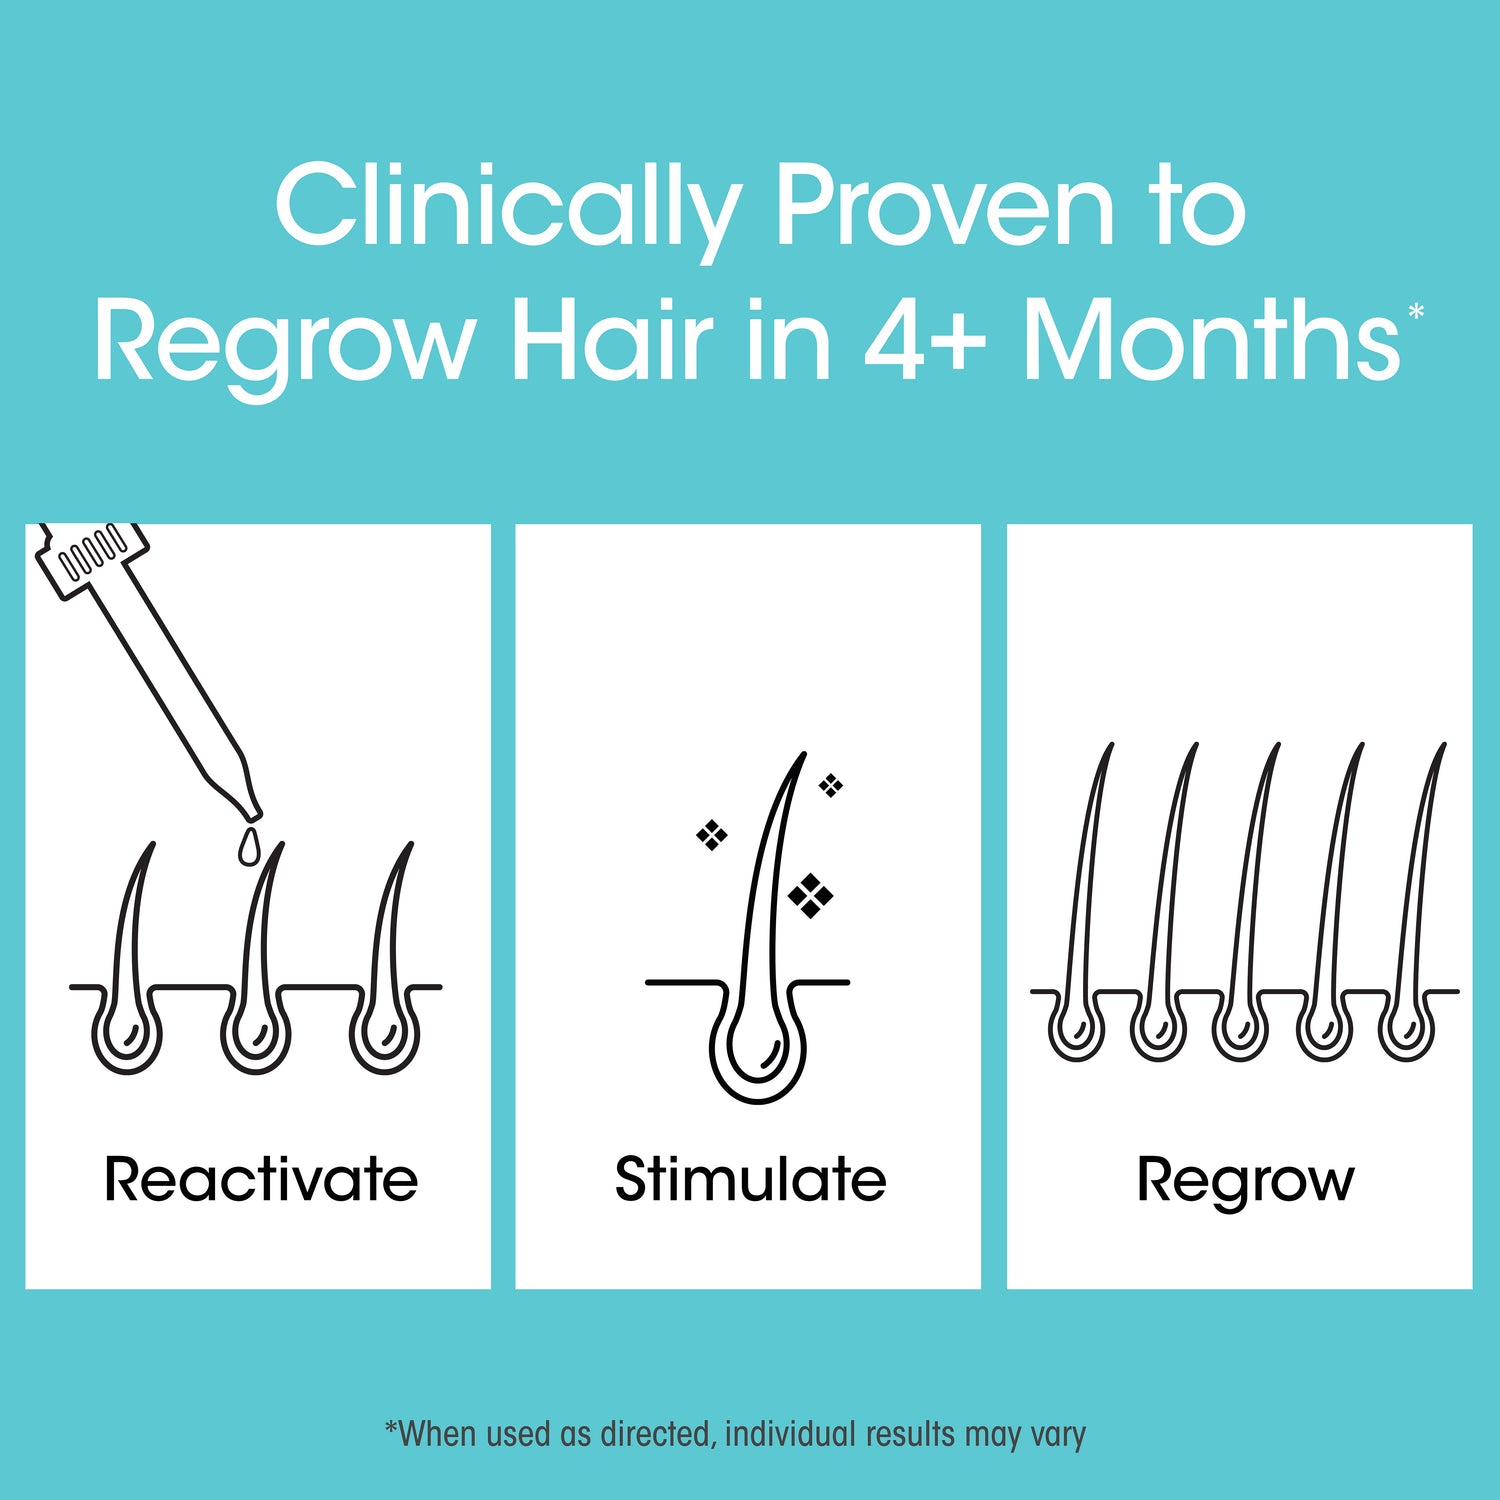 Clinically proven to regrow hair in 4+ months when used as directed (individual results may vary). 